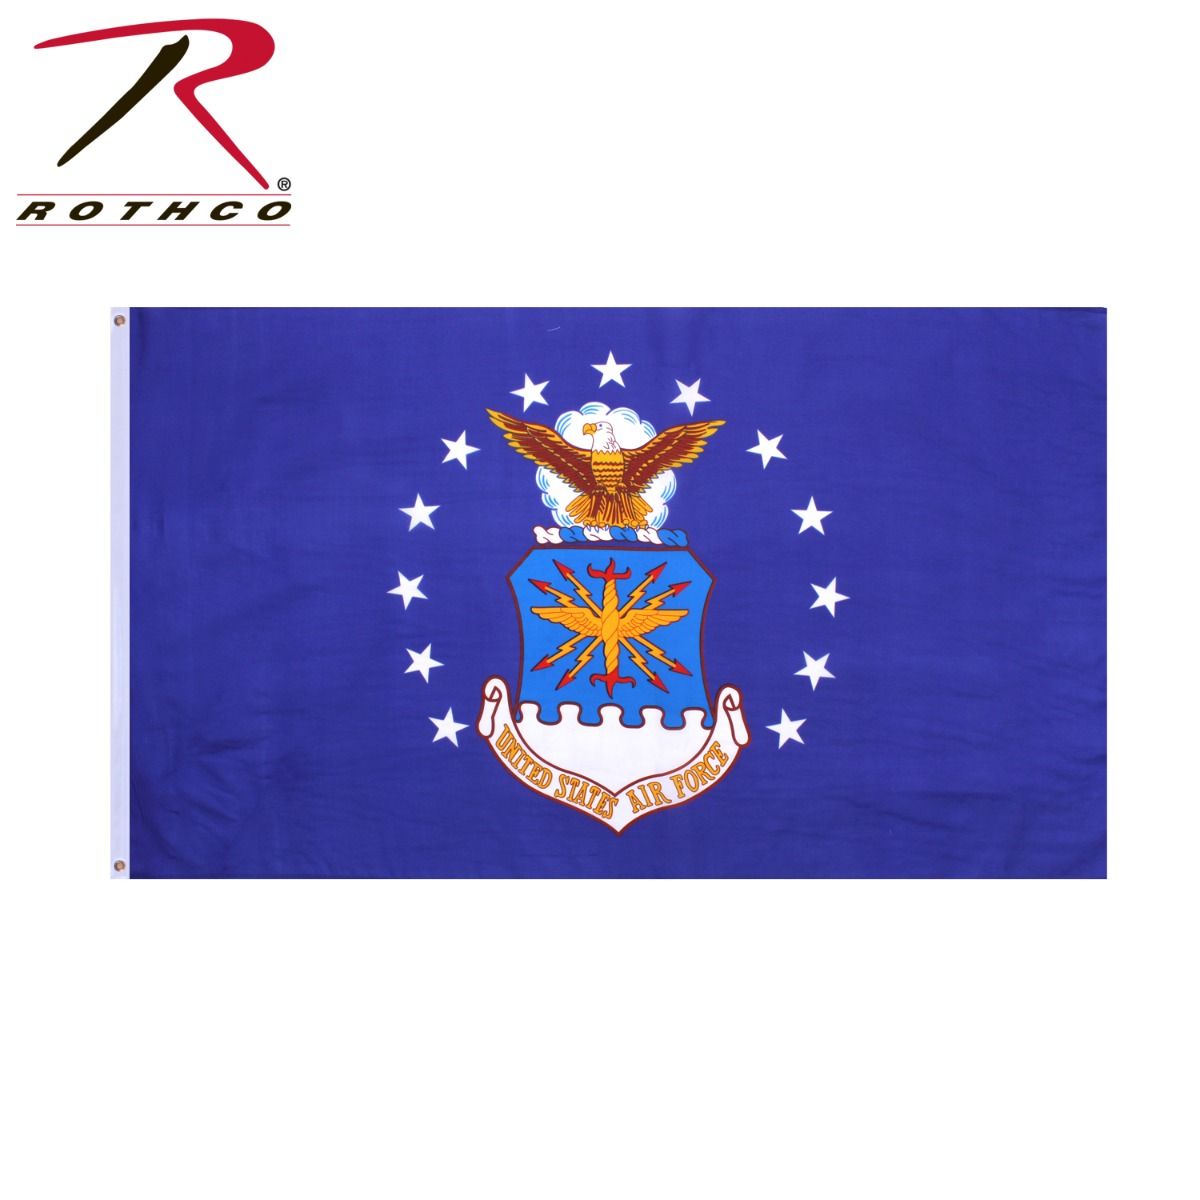 AIR FORCE  Military US Banner Flag Double Stitched 3' x 5' Grommets Rothco 1467 